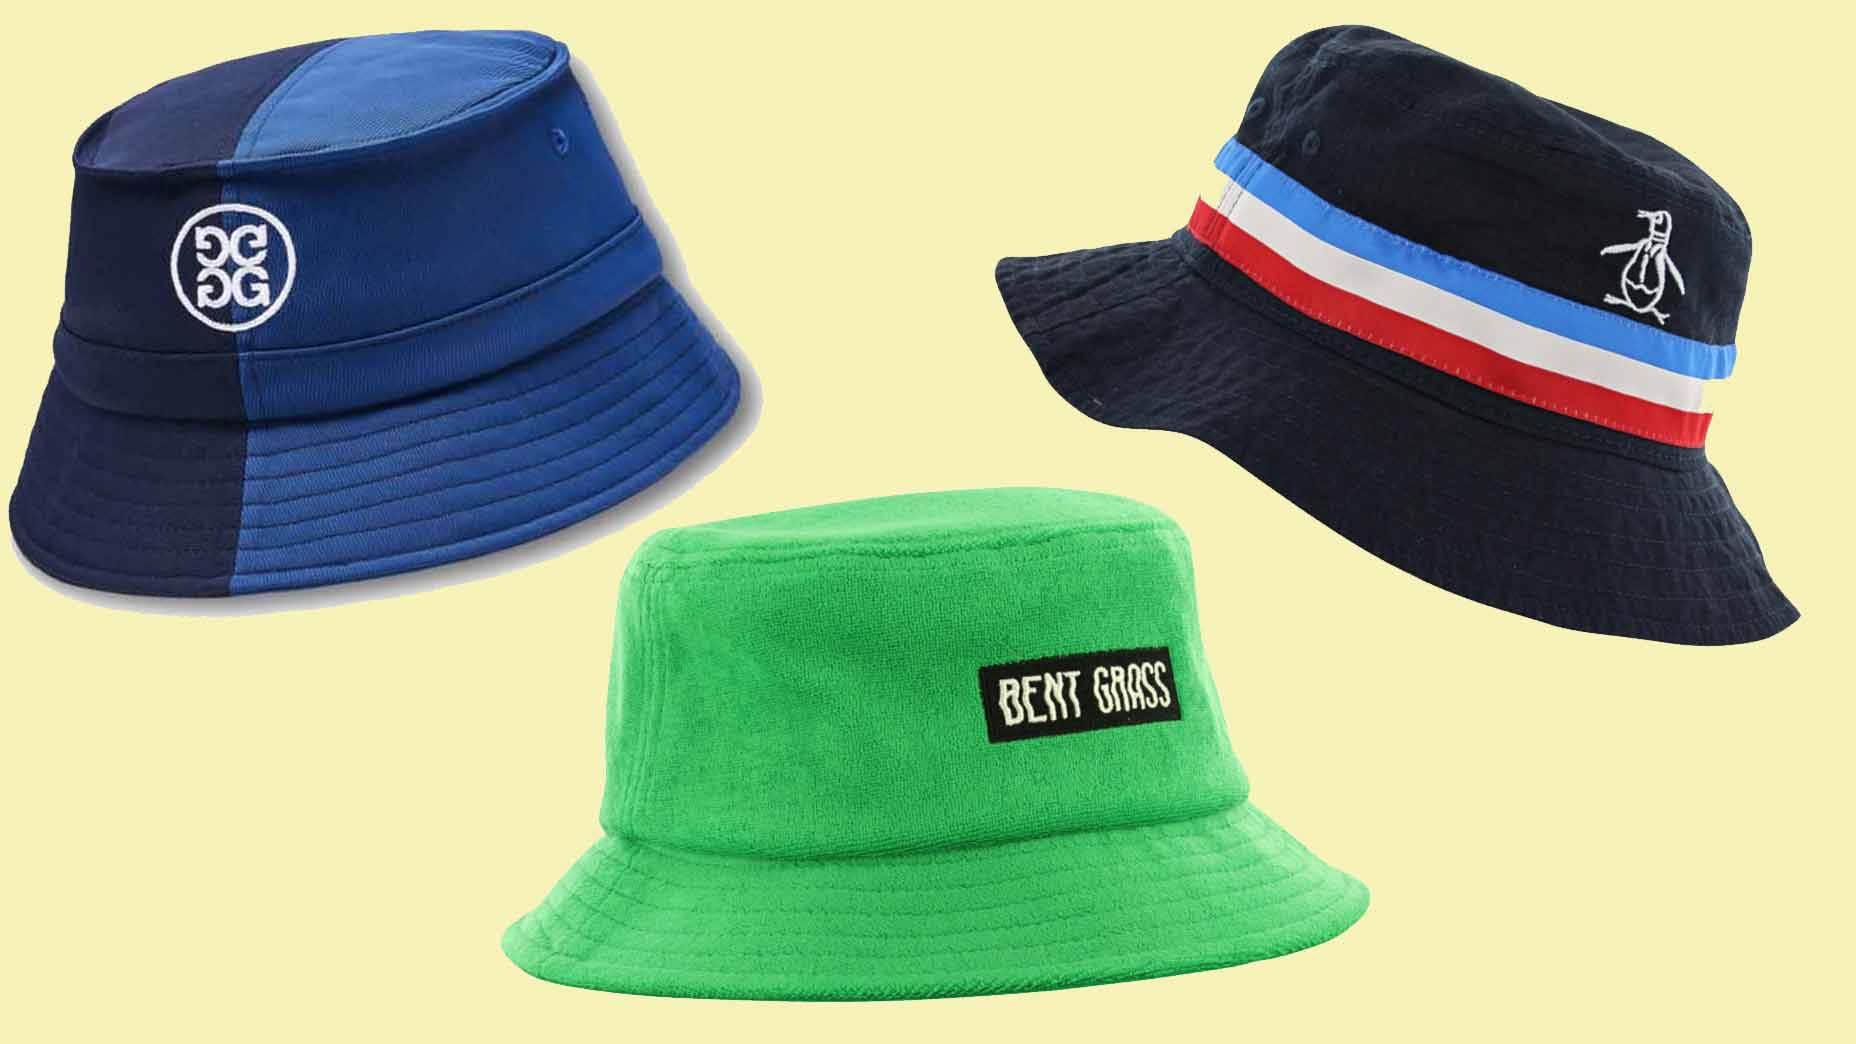 Give your baseball caps a break and try one of these 6 trendy